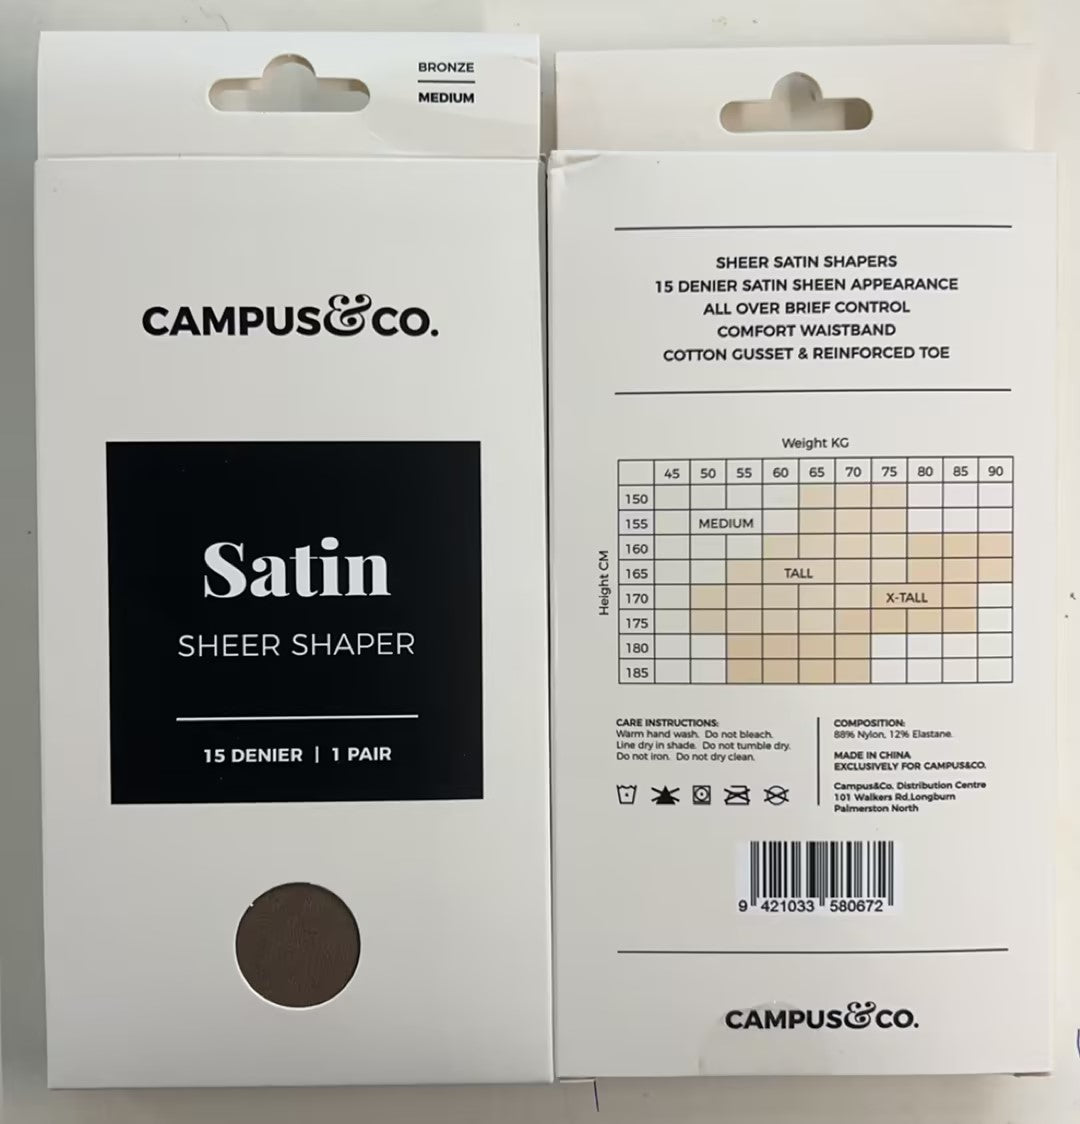 Campus&Co. Satin Sheer Shaper Bronze Tall (Case of 10)